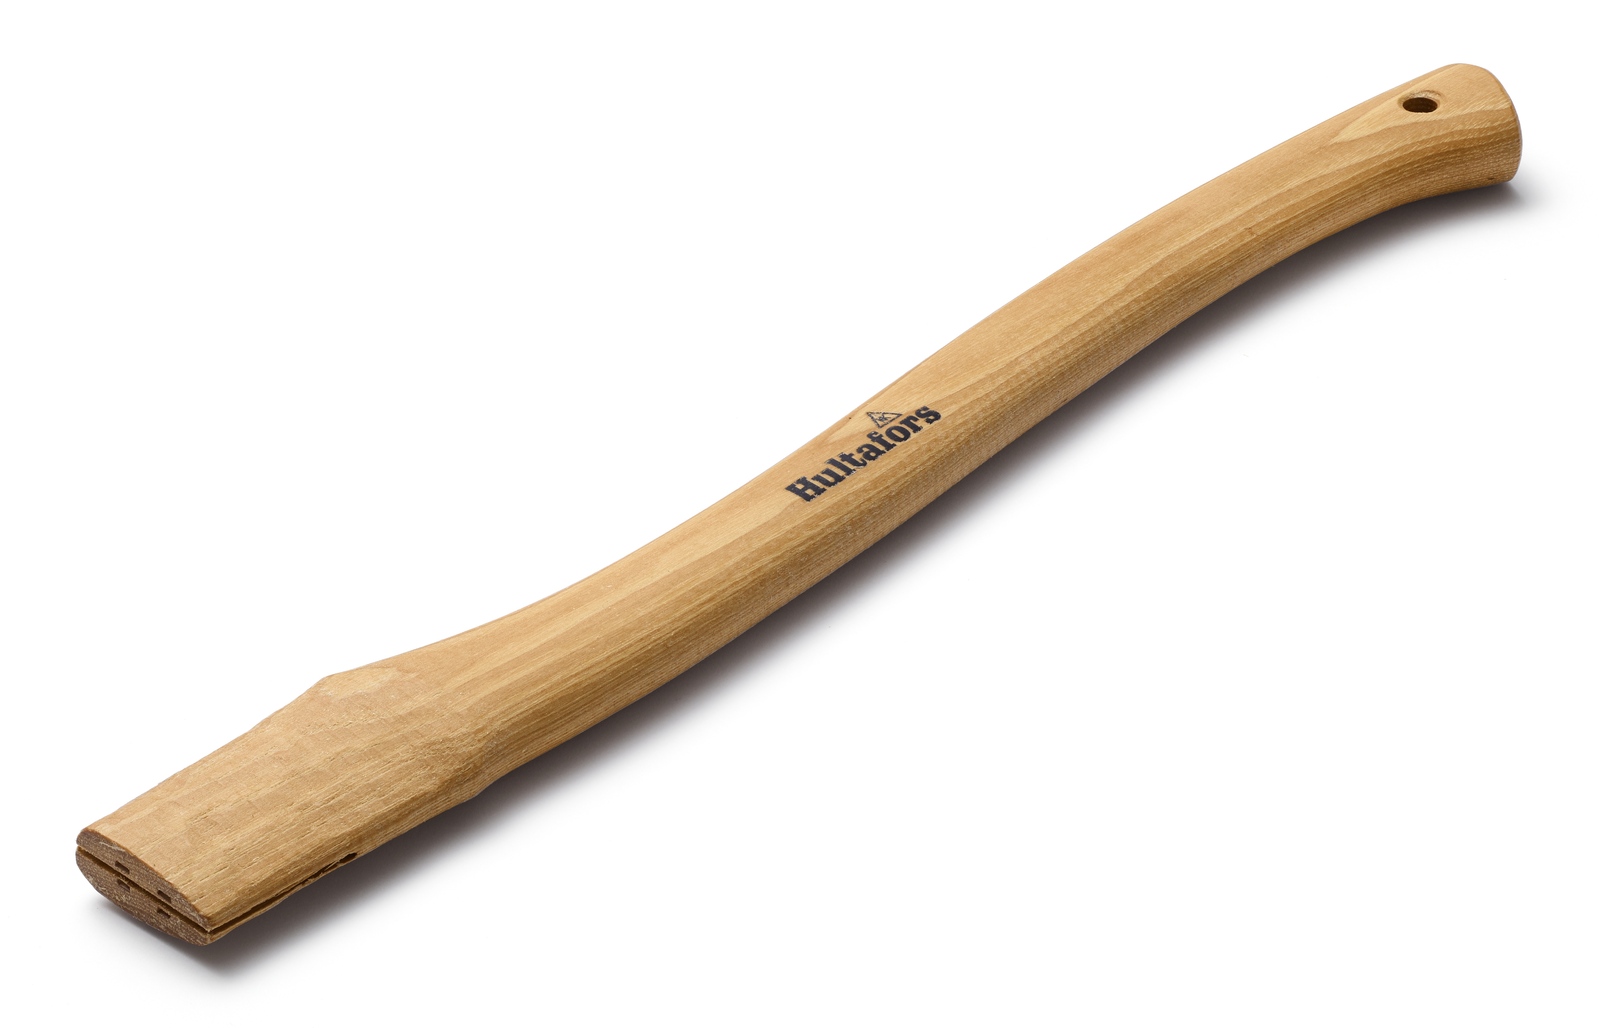 Hultafors 3842710 Curved Hickory Handle AHC 500-50x20mm 